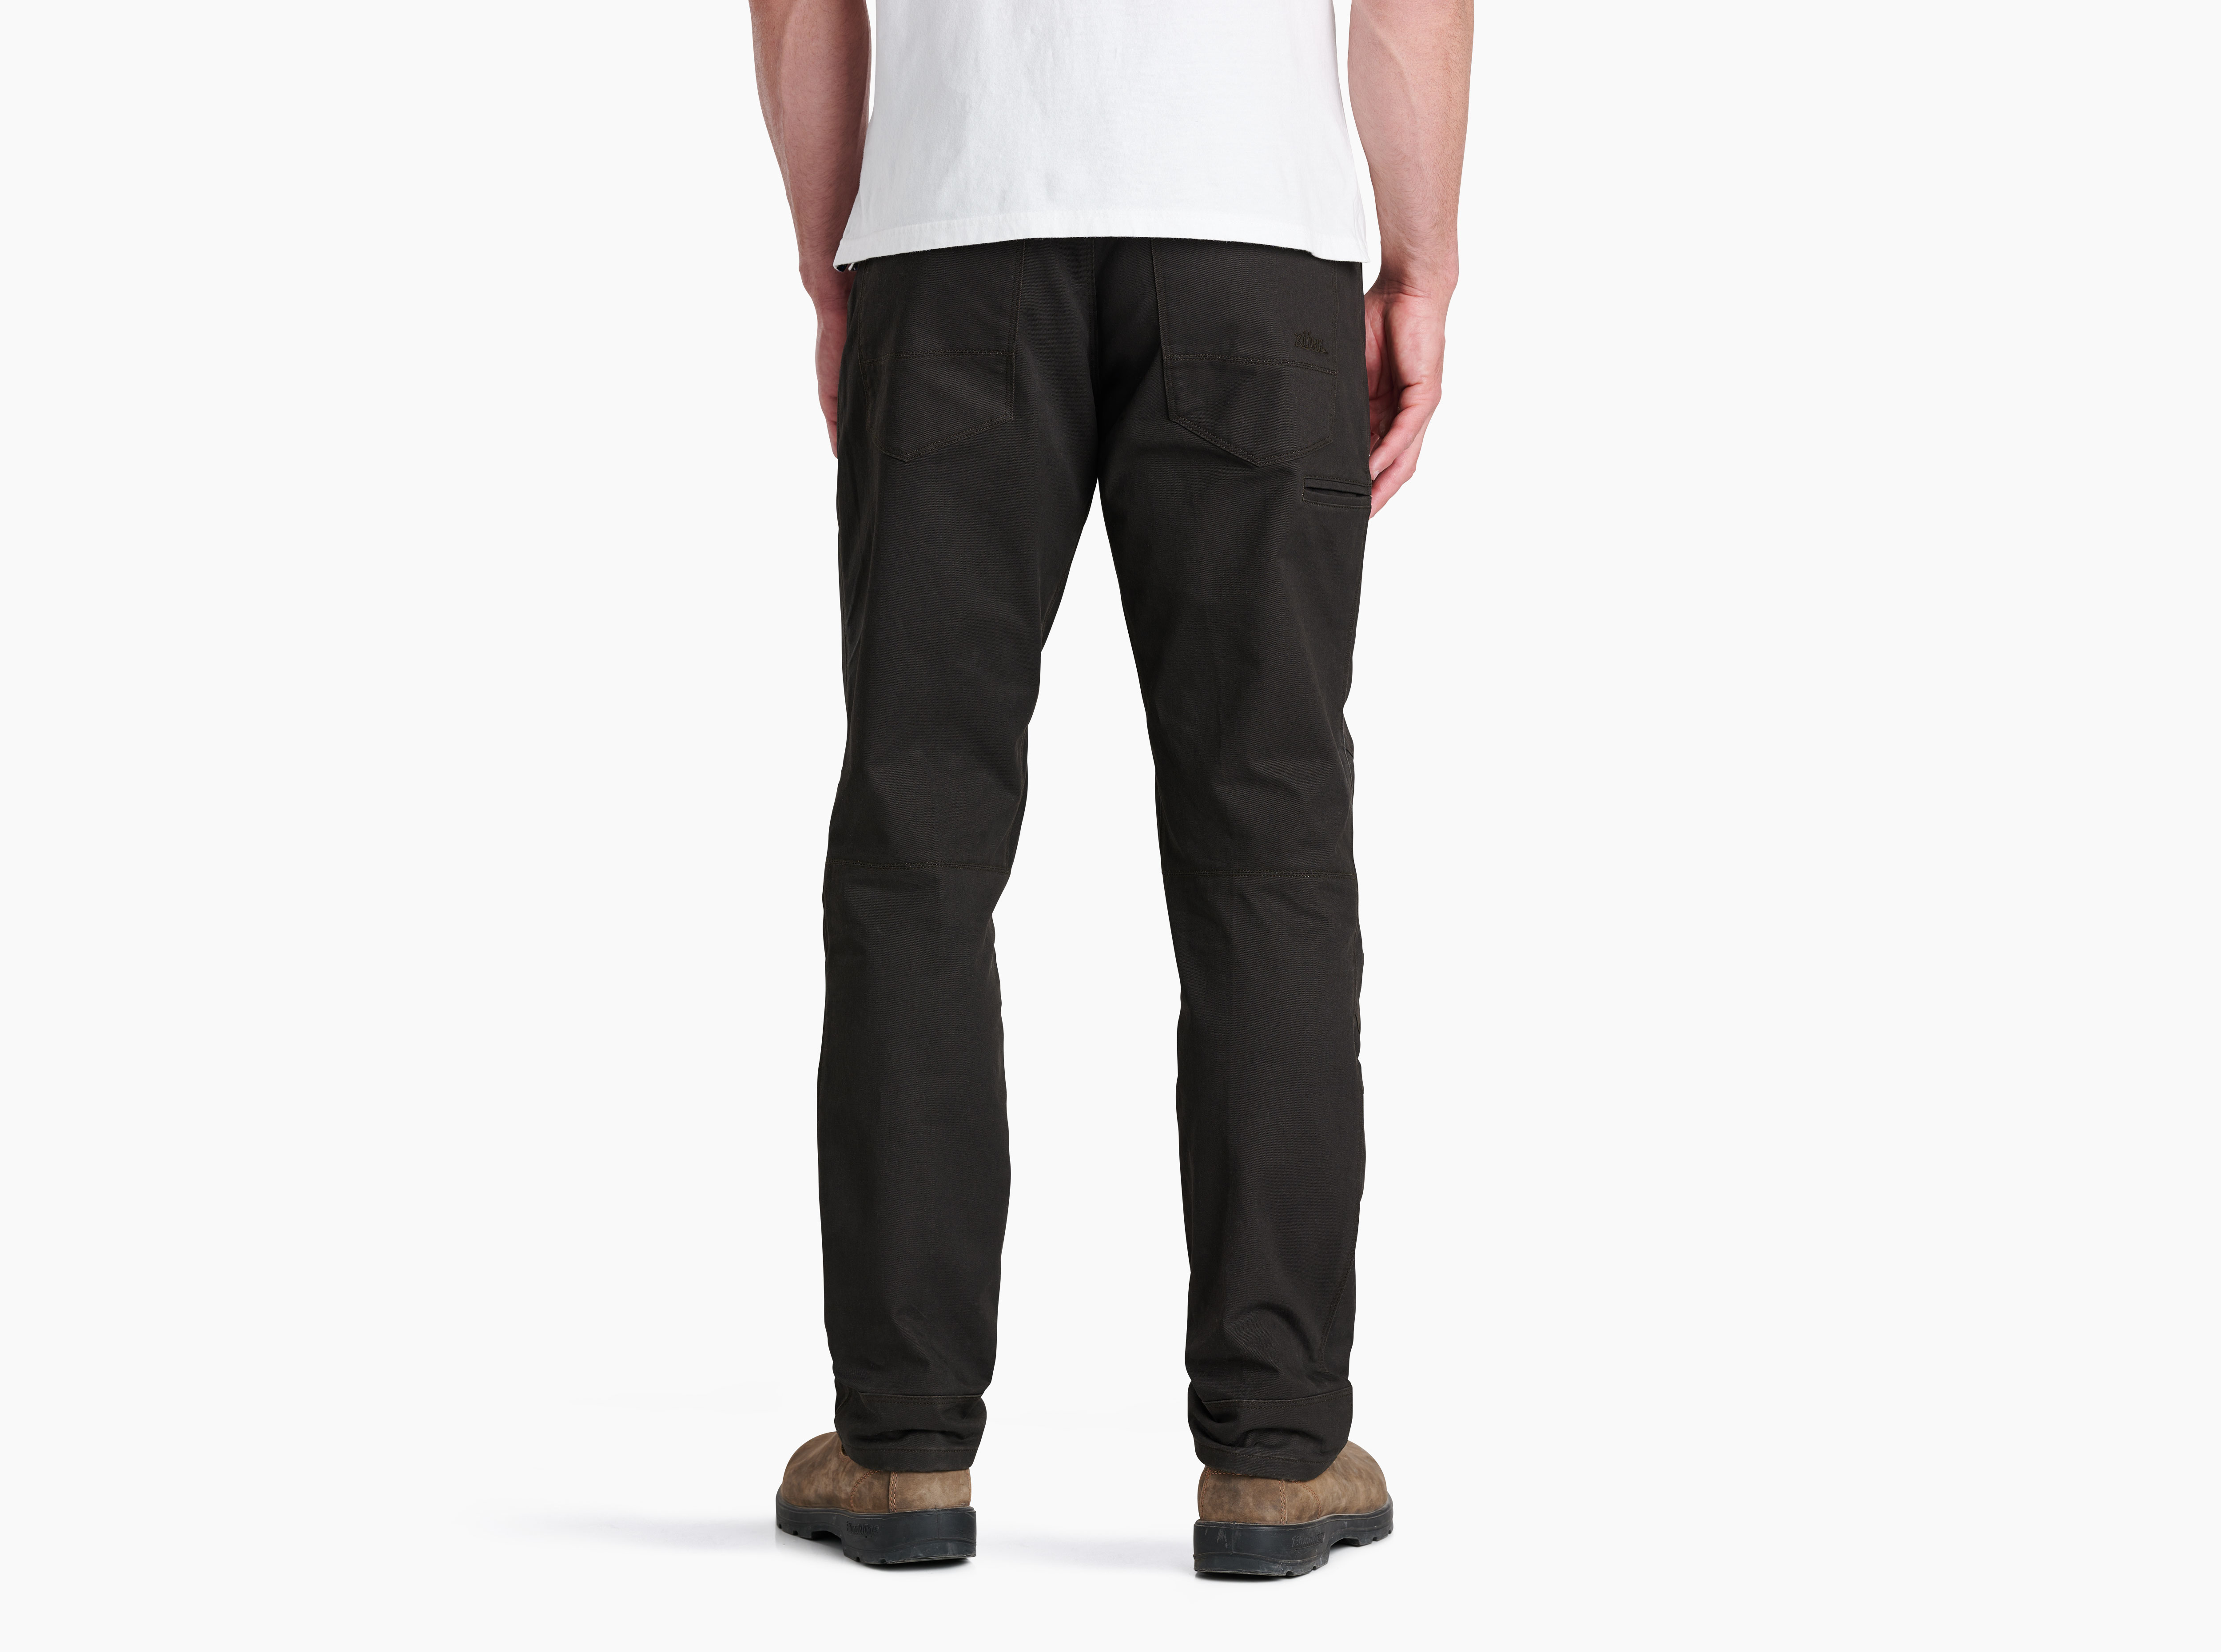 Hiking Pants < Mens And Womens Online Outlet - KÜHL < Acores-Flores